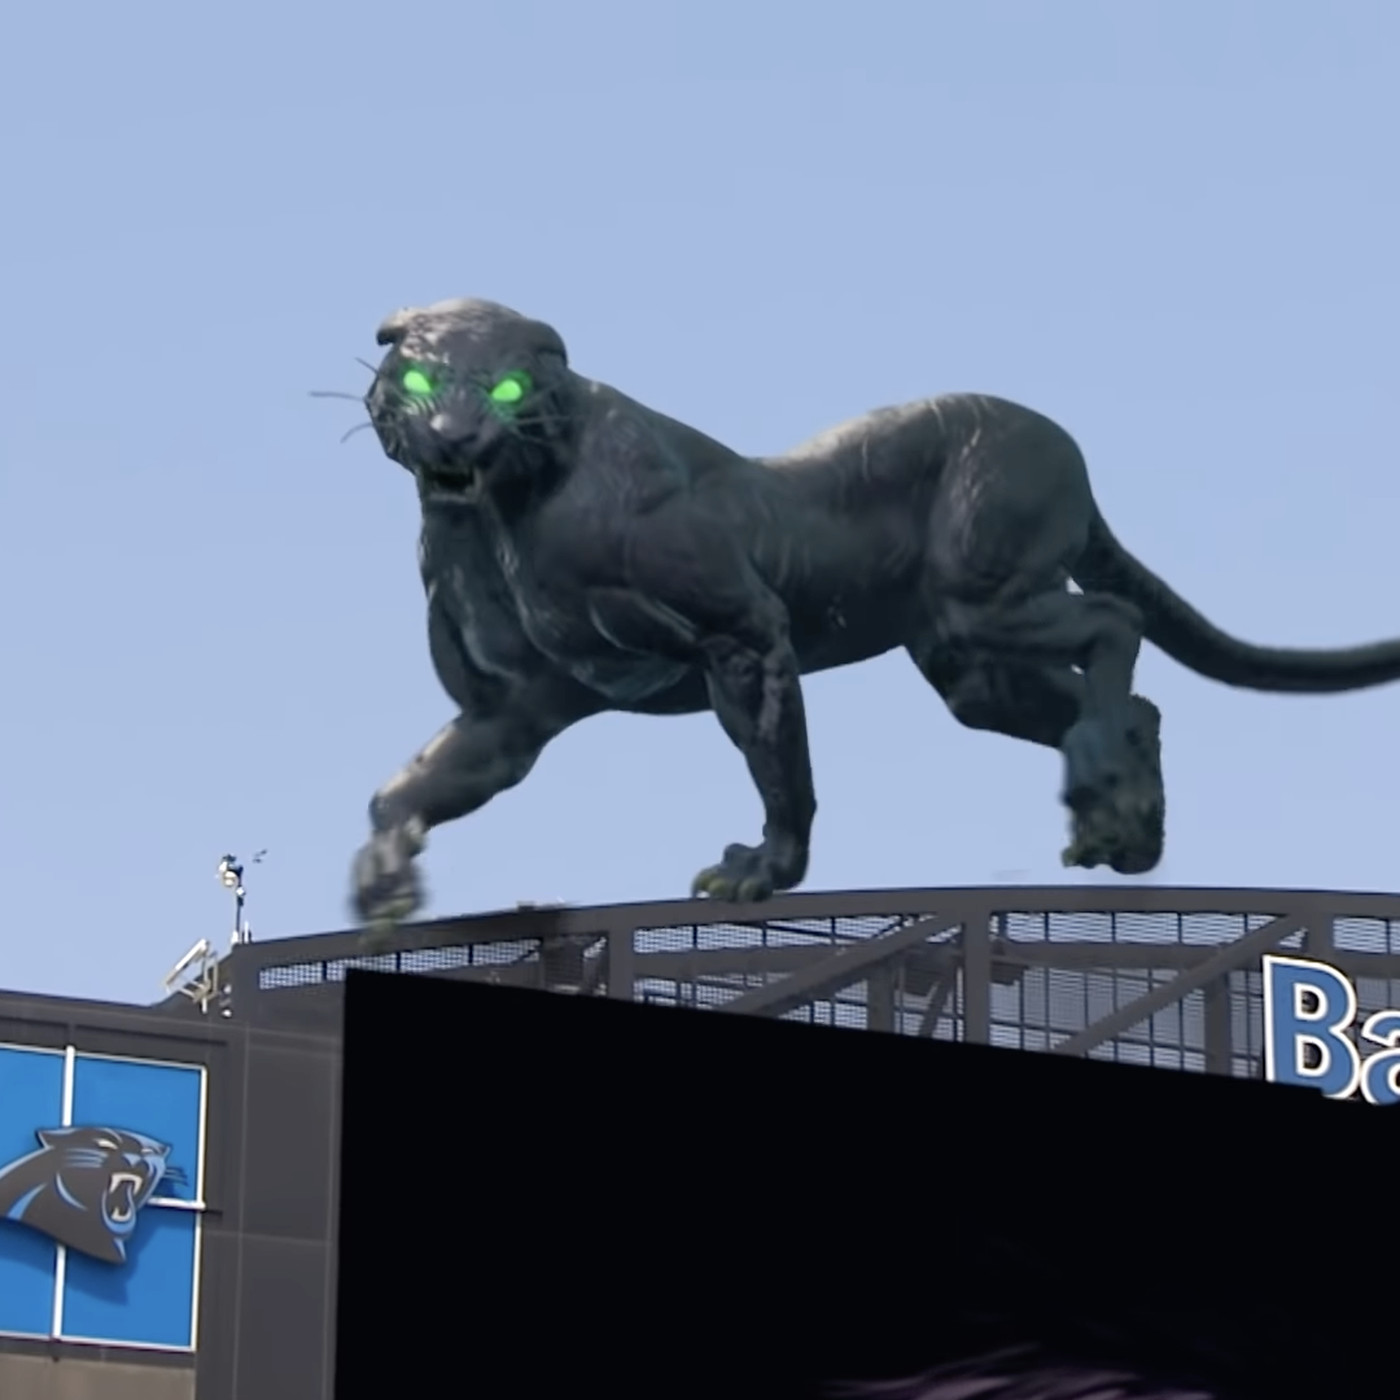 Here's the tech behind the Carolina Panthers' giant AR cat - The Verge